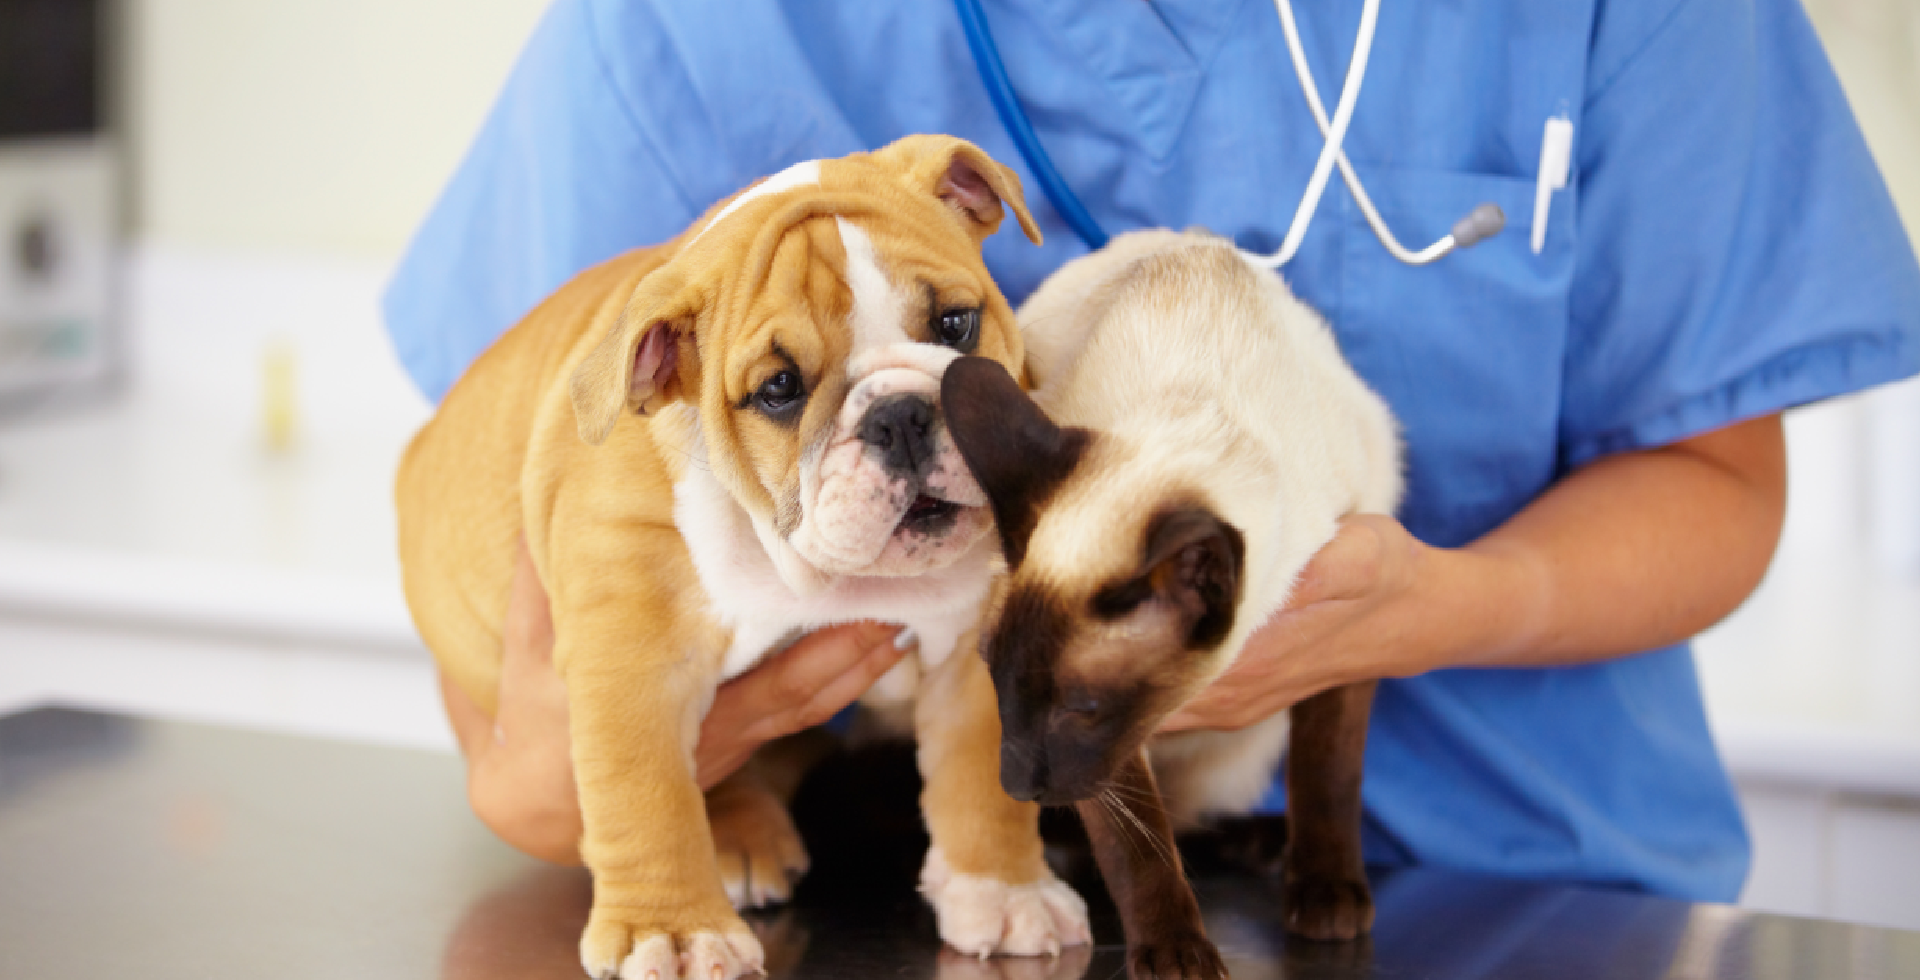 A Bulldog and a Siamese on a treatment table with a blue veterinary surgical glow in the background.